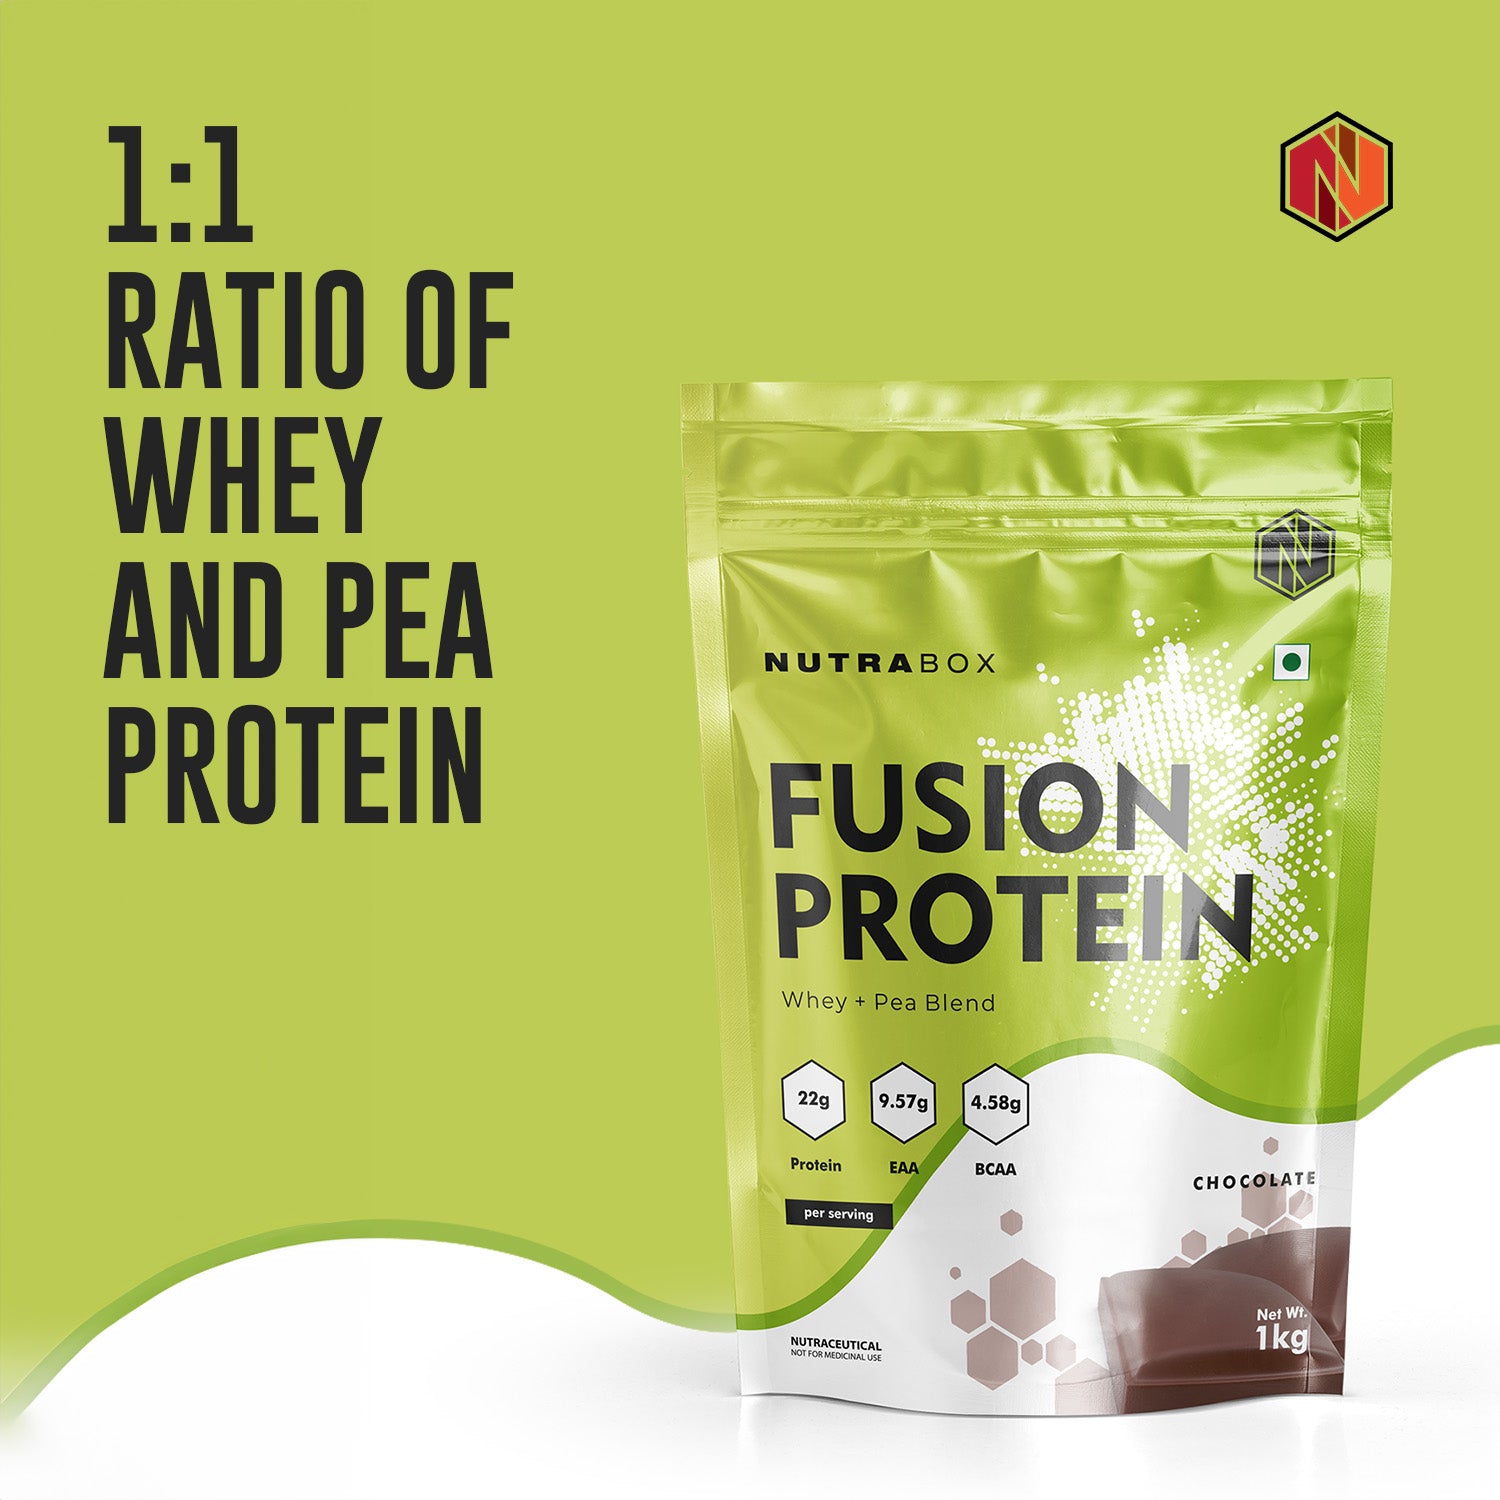 1:1 ratio of Whey and Pea Protein